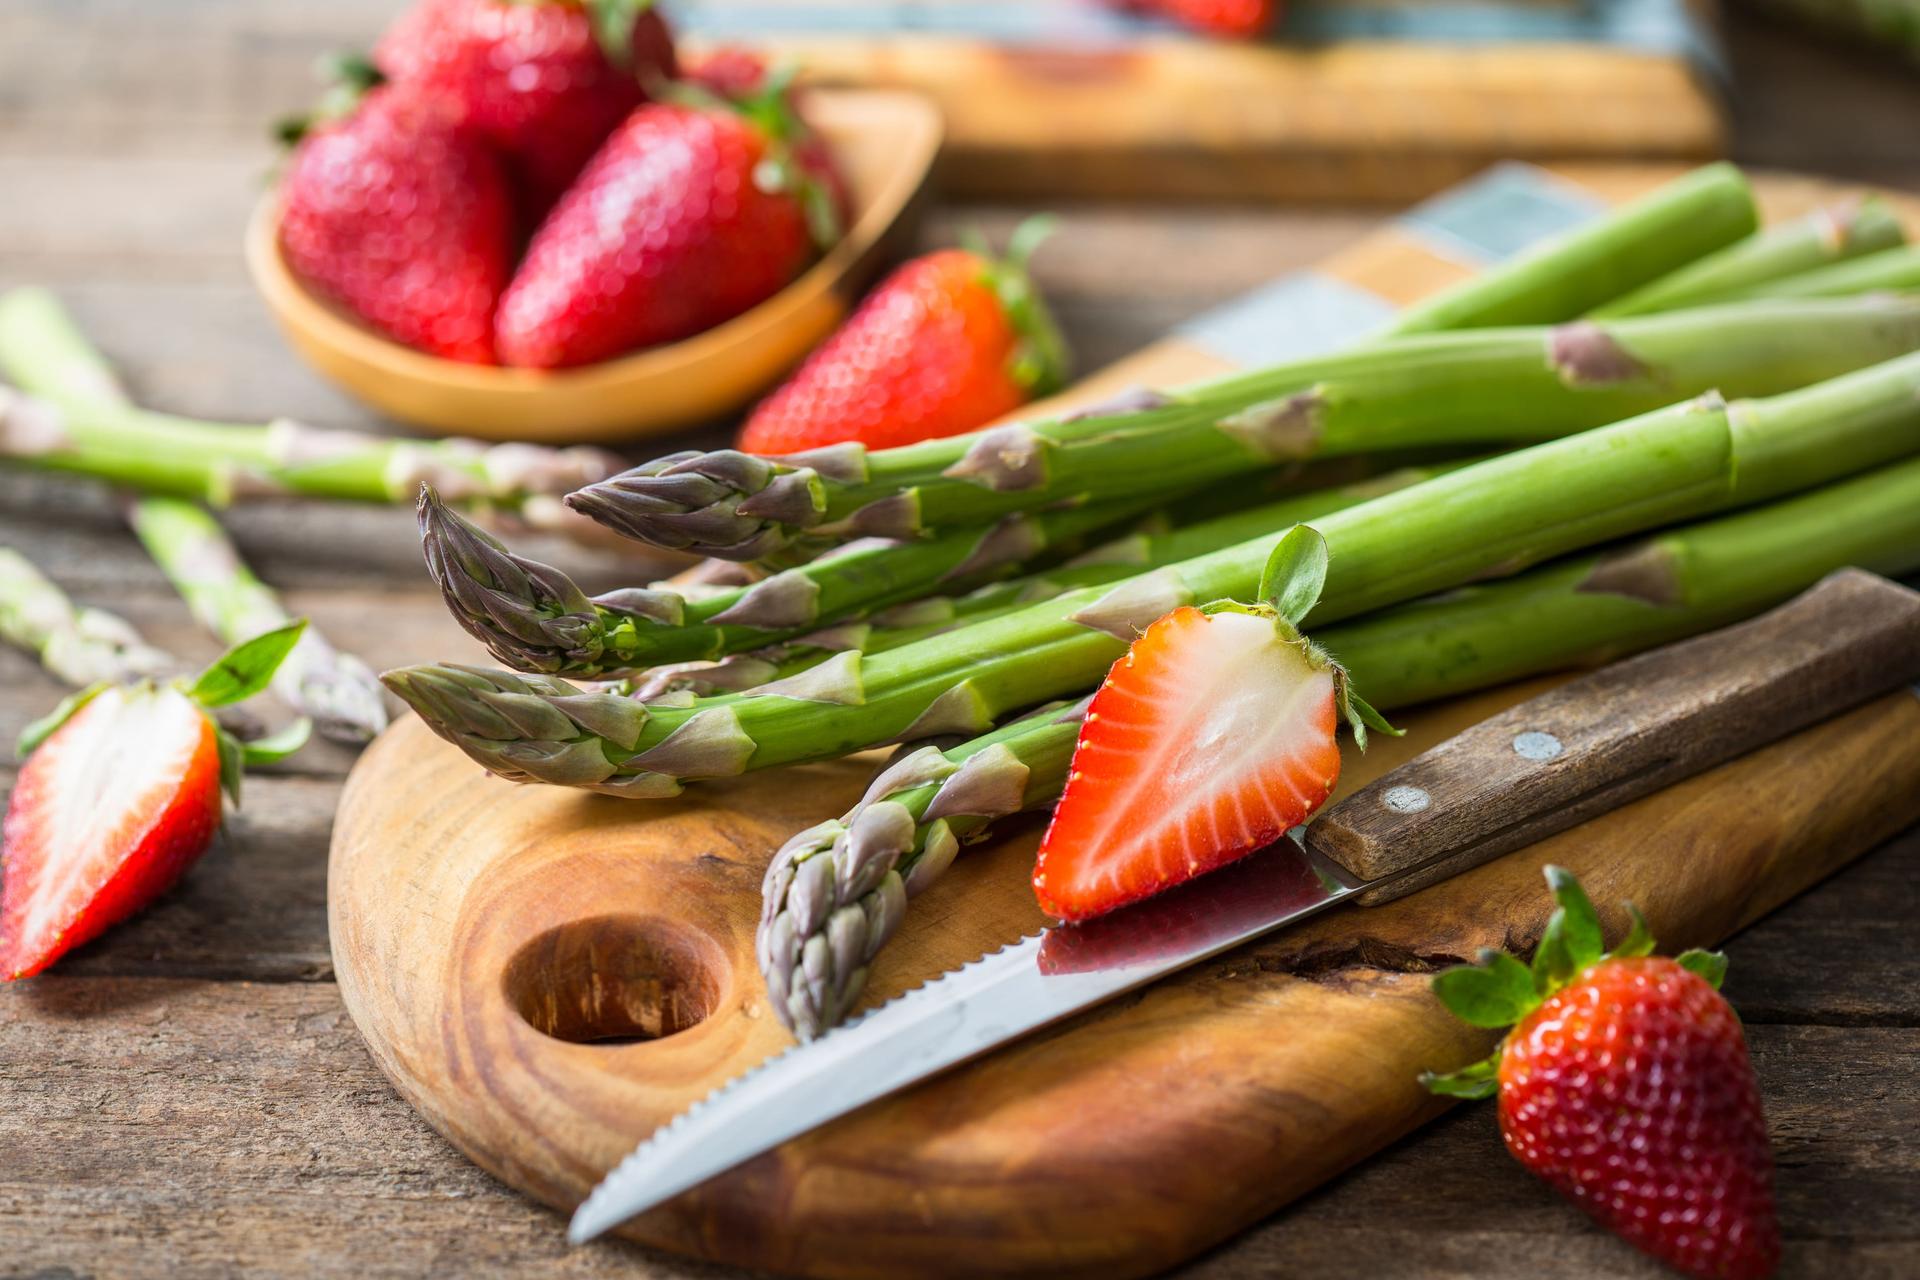 Asparagus and strawberry